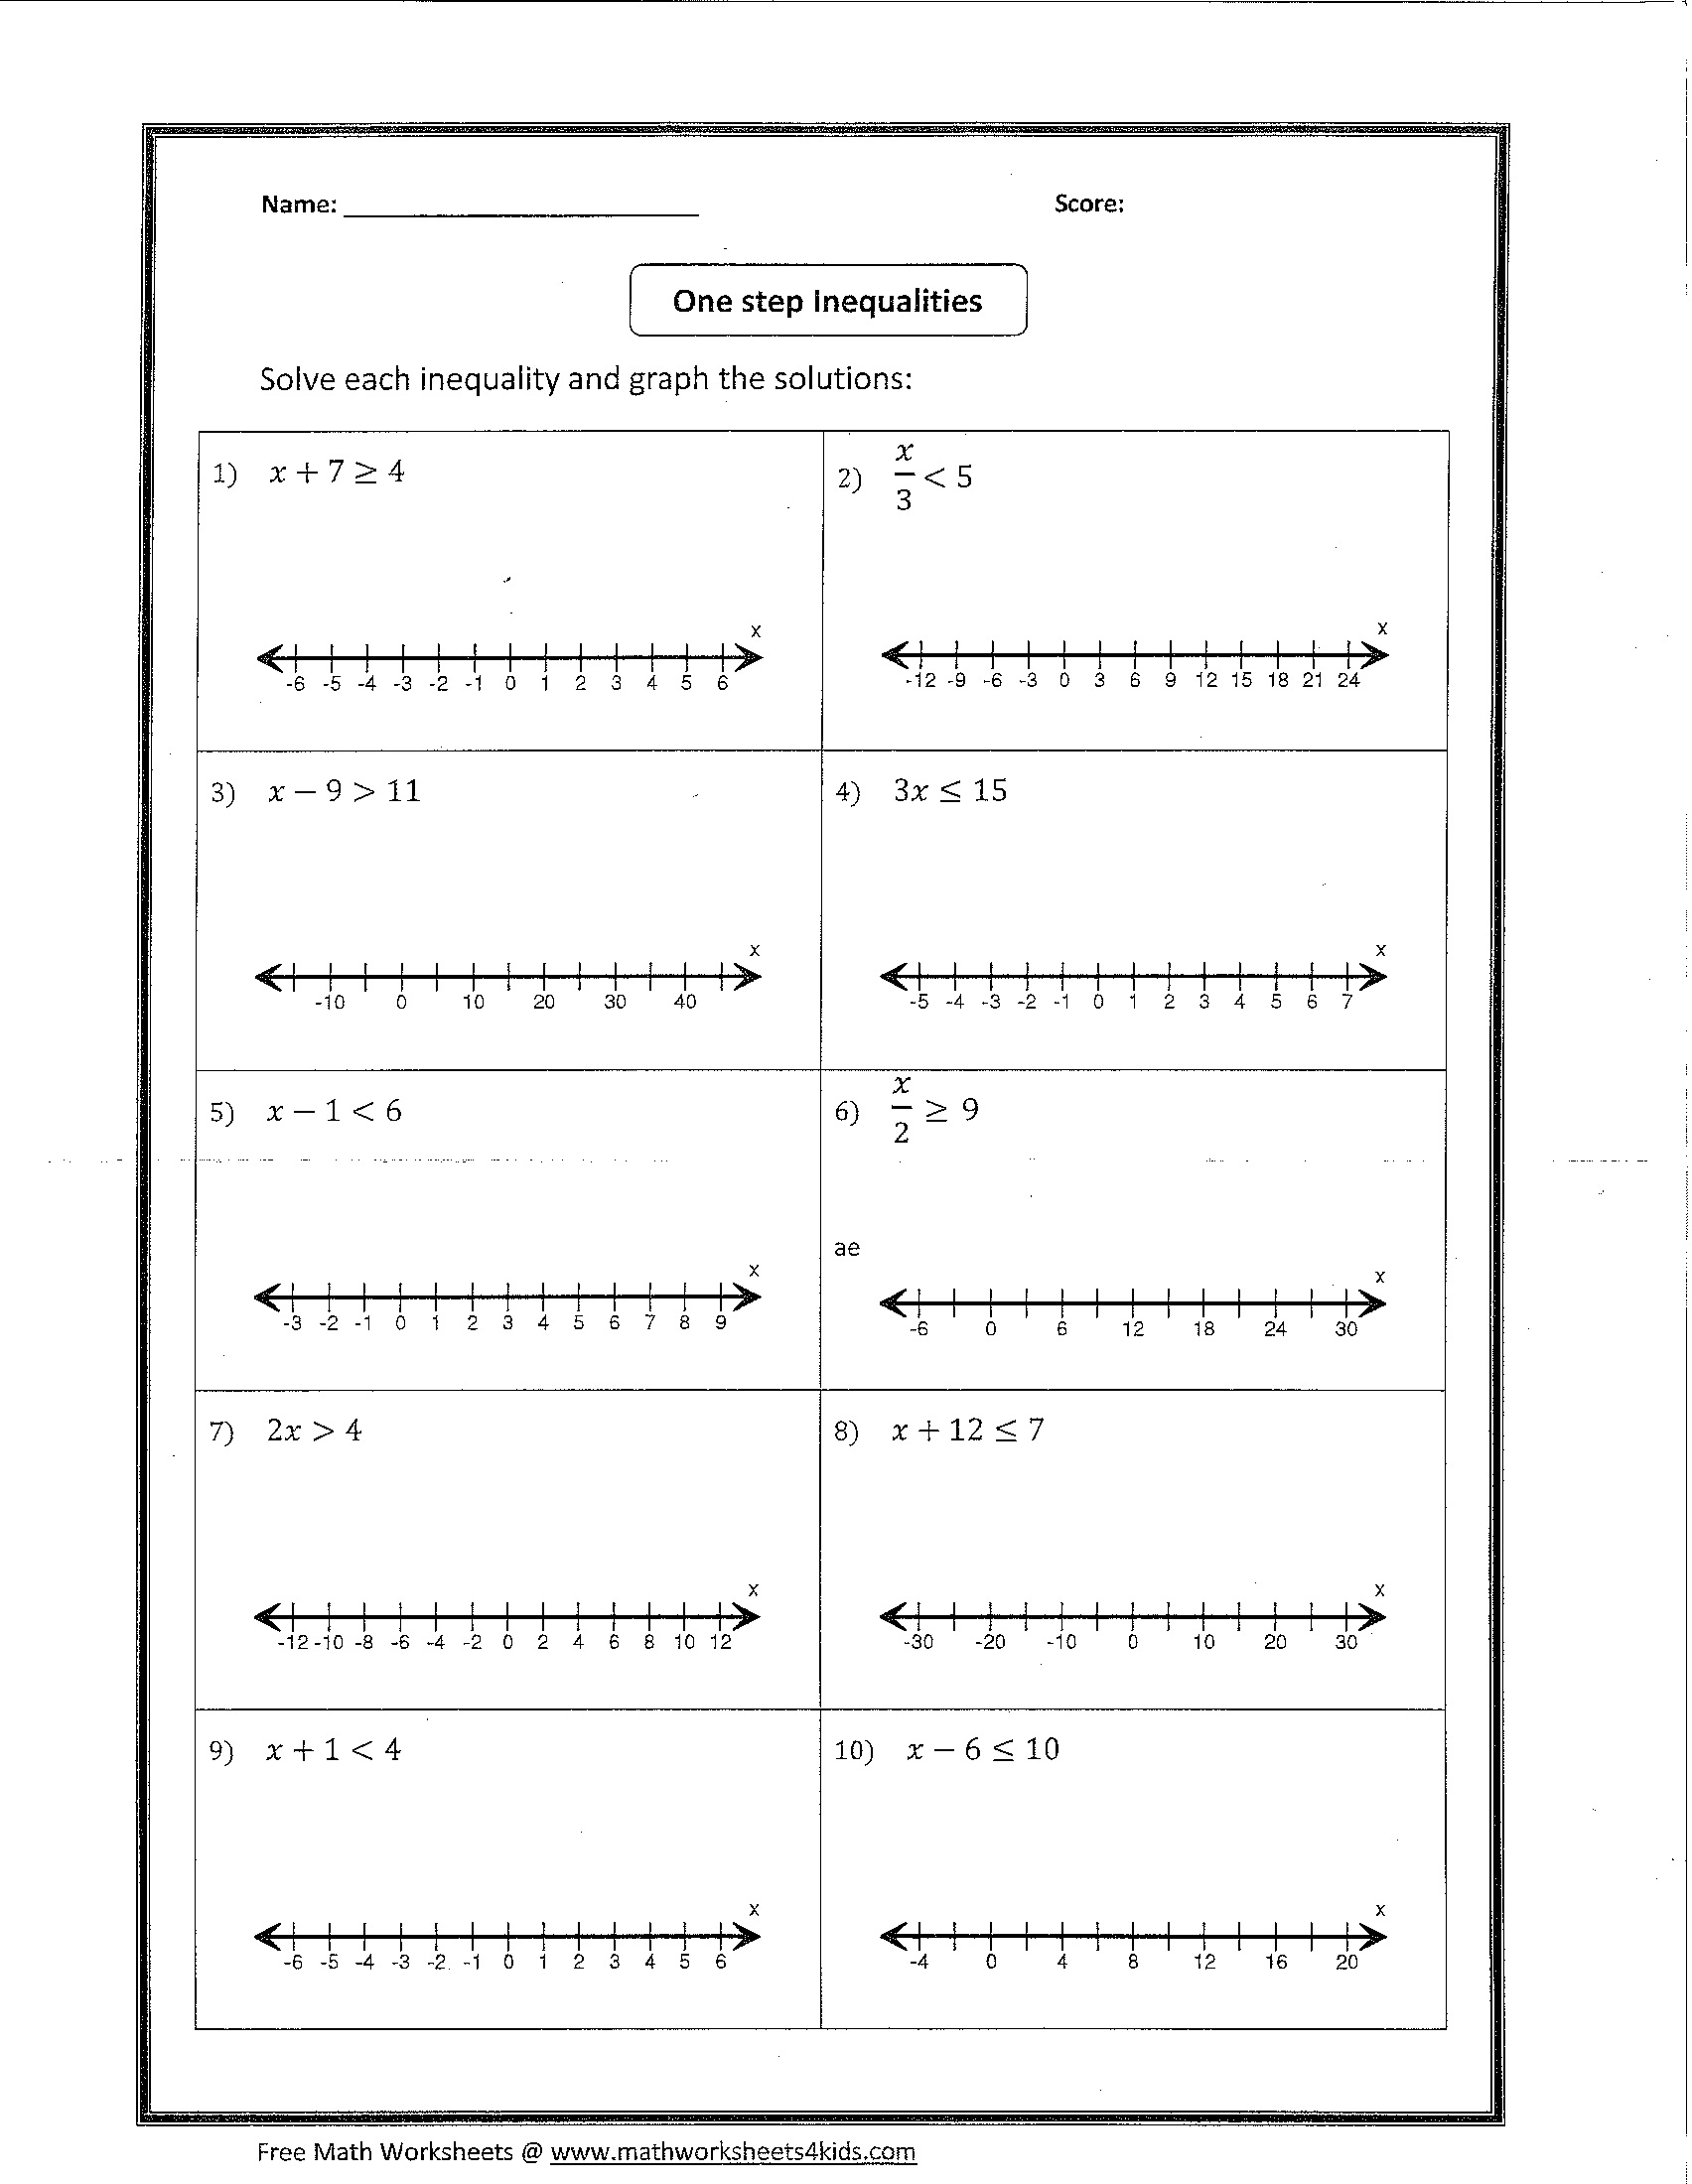 8-best-images-of-graphing-inequalities-on-a-number-line-worksheets-one-step-inequalities